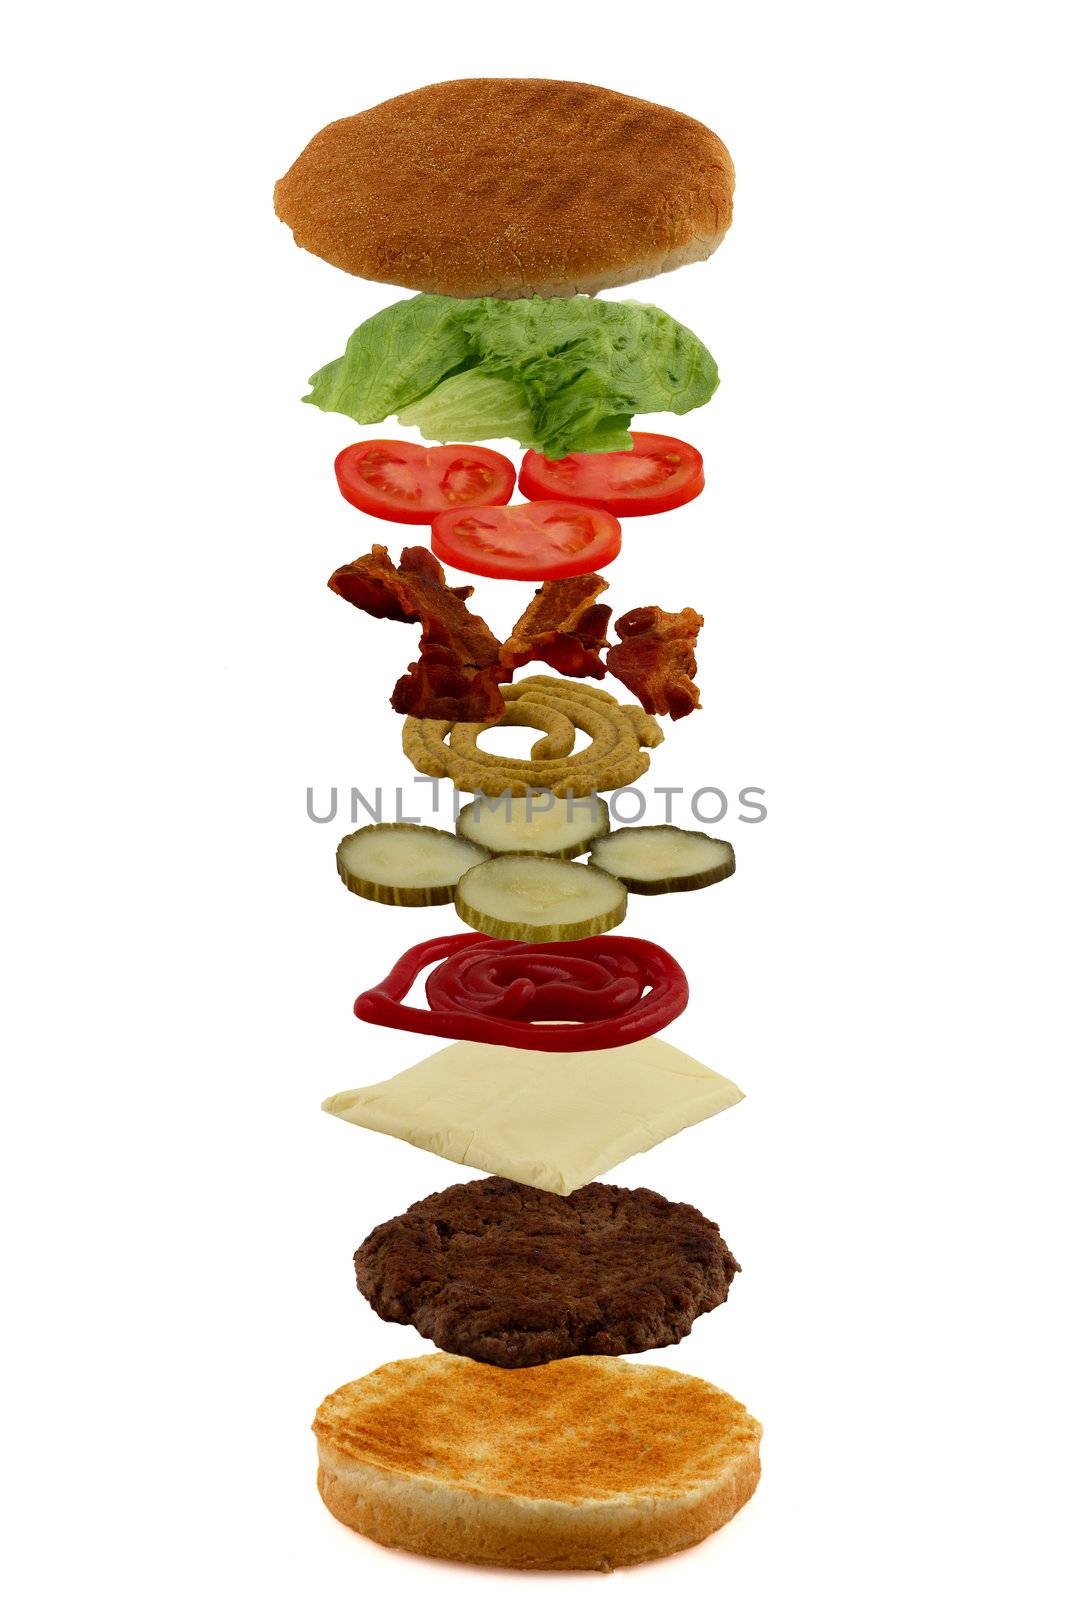 Isometric exploded view of hamburger ingredients isolated on whi by lavsen